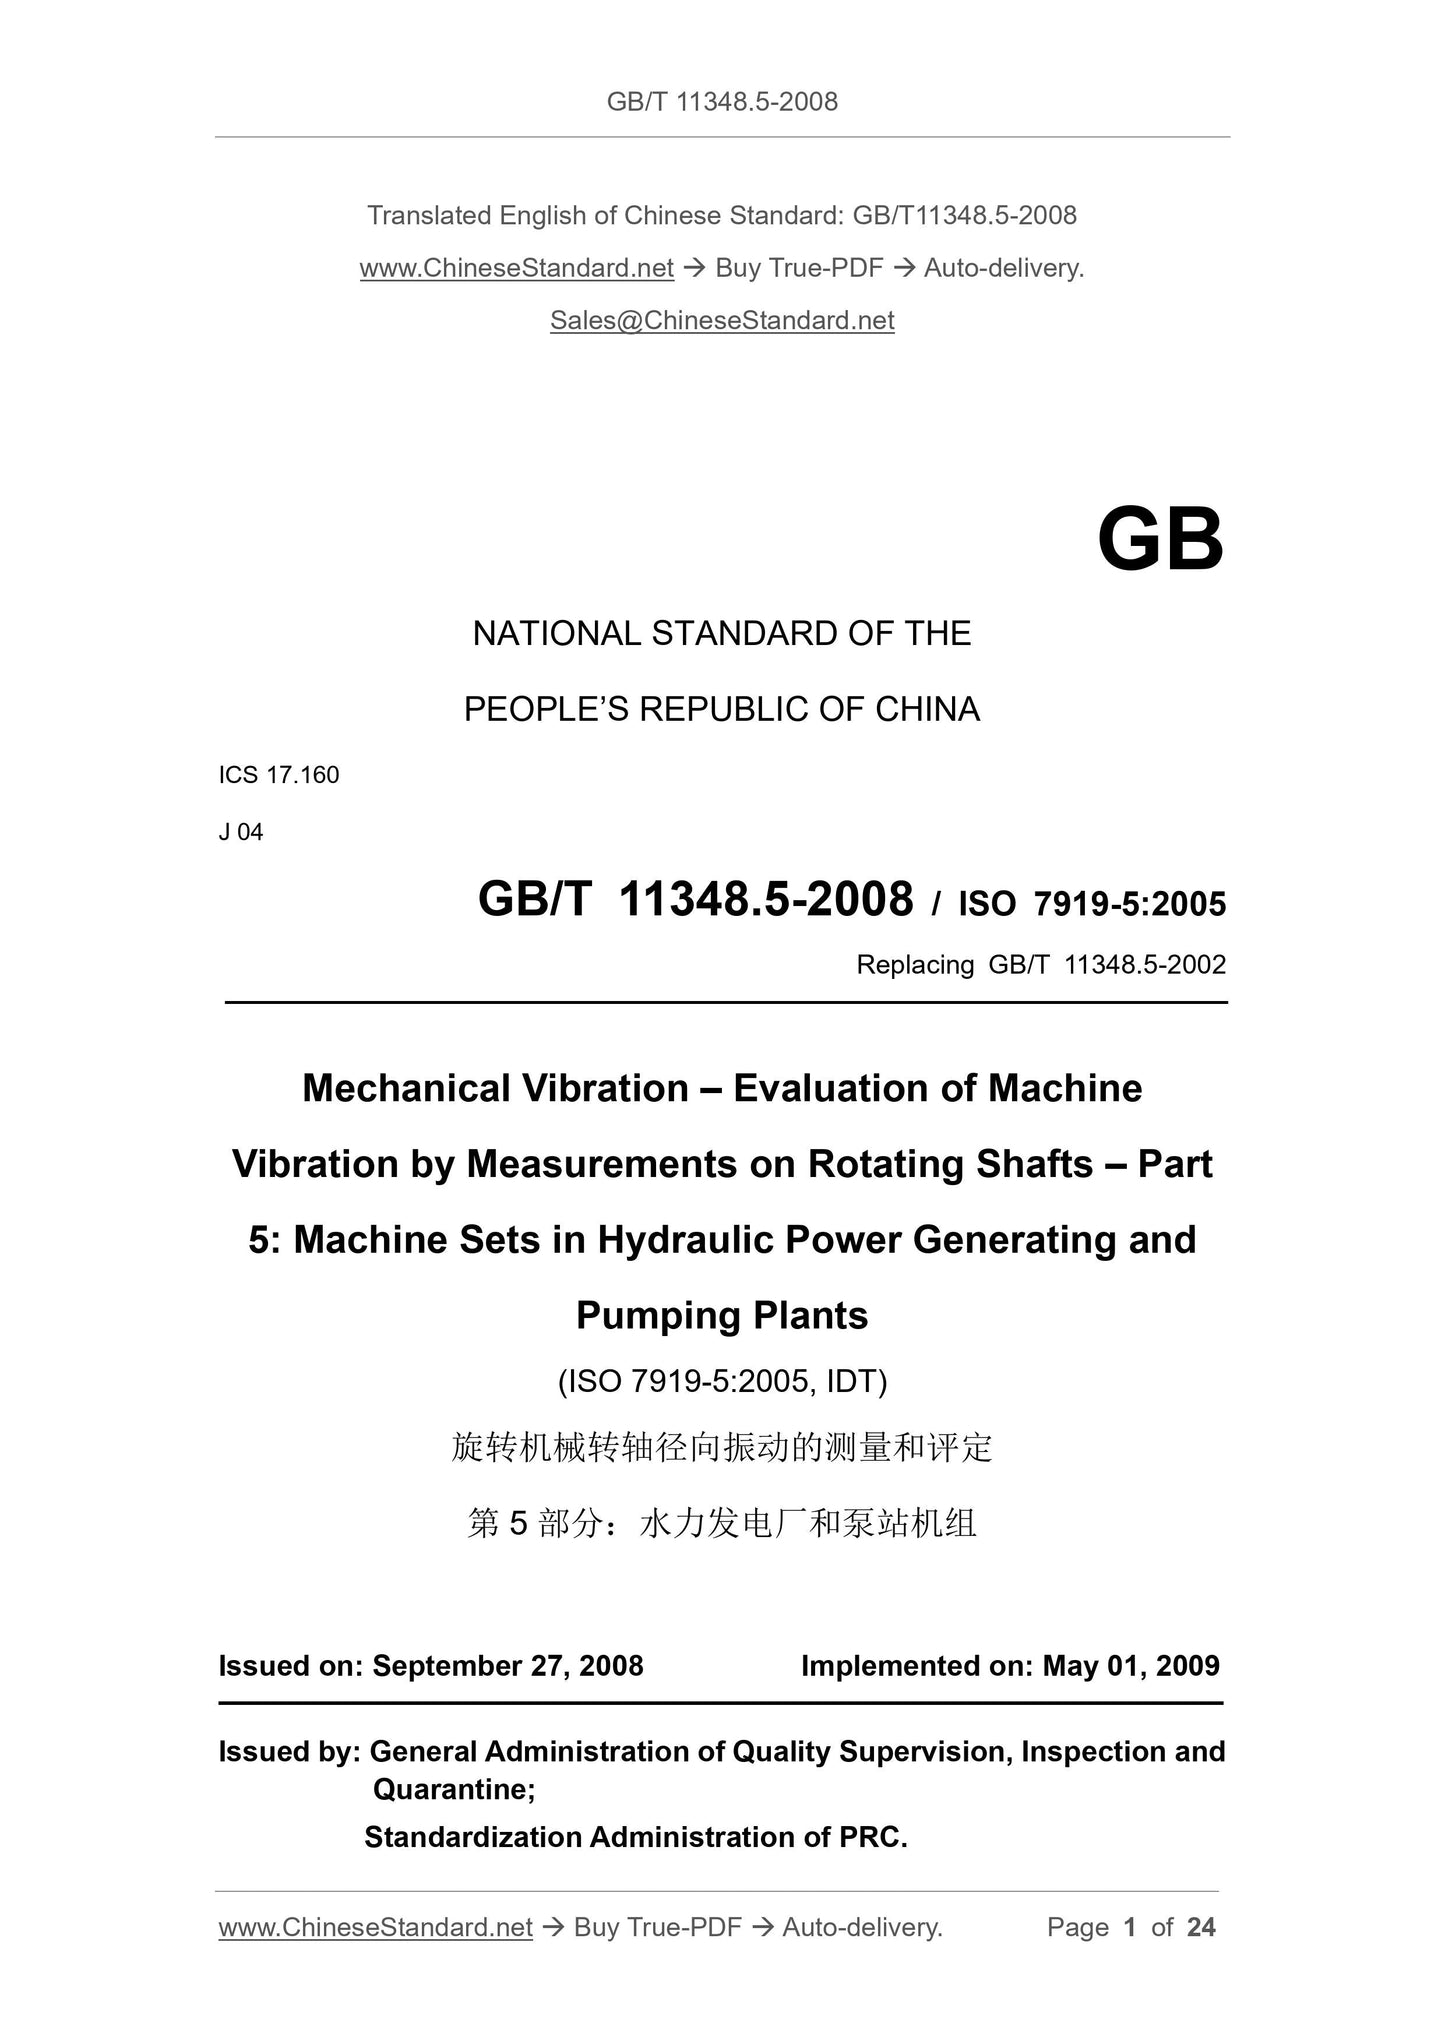 GB/T 11348.5-2008 Page 1